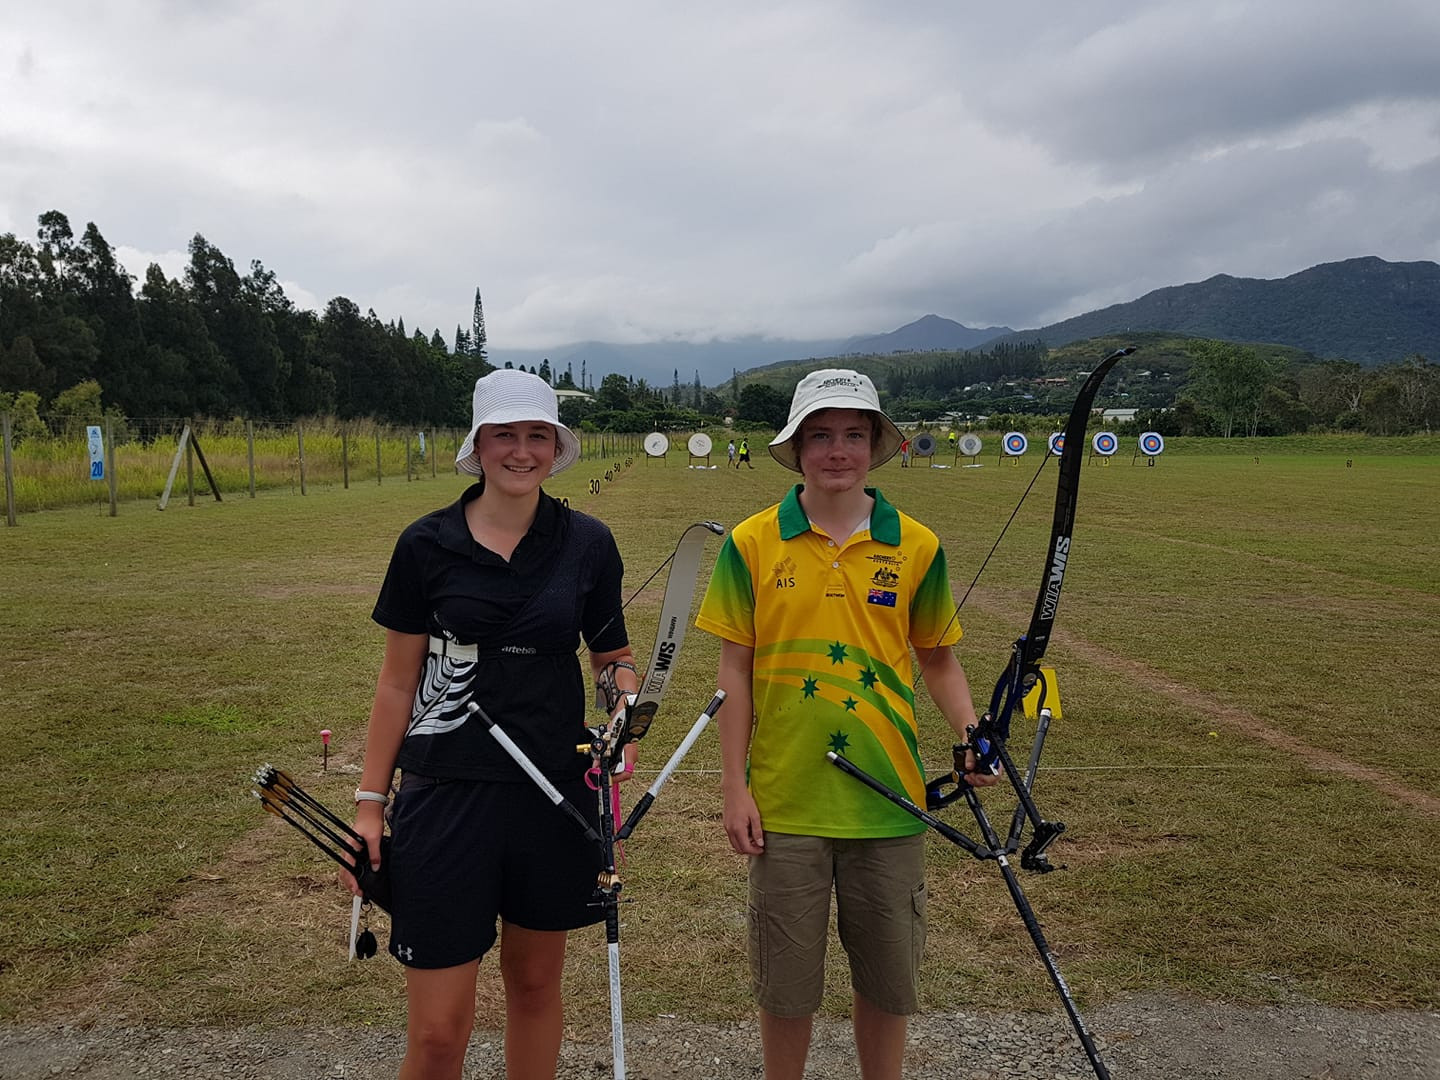 Australia and New Zealand earn Buenos Aires 2018 archery quota places in New Caledonia